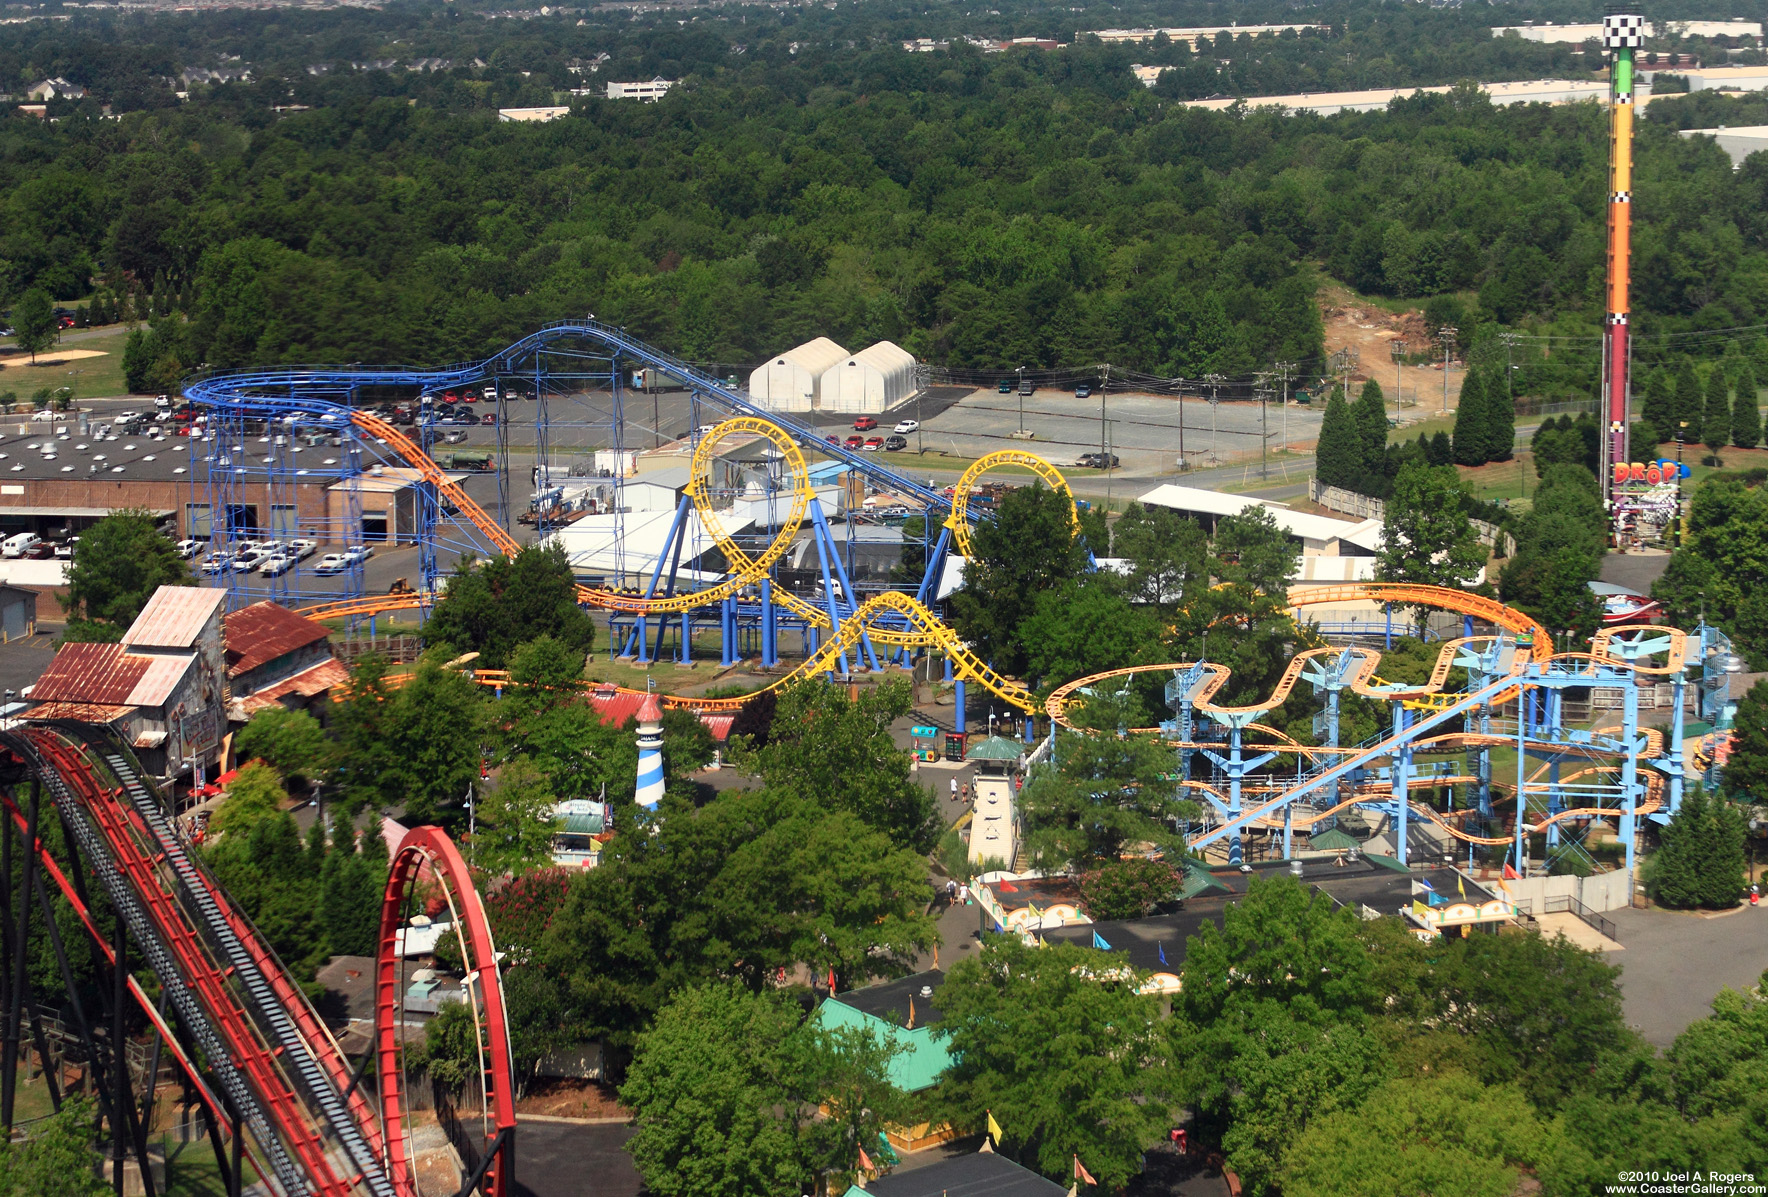 Carolina Cyclone - the view from above